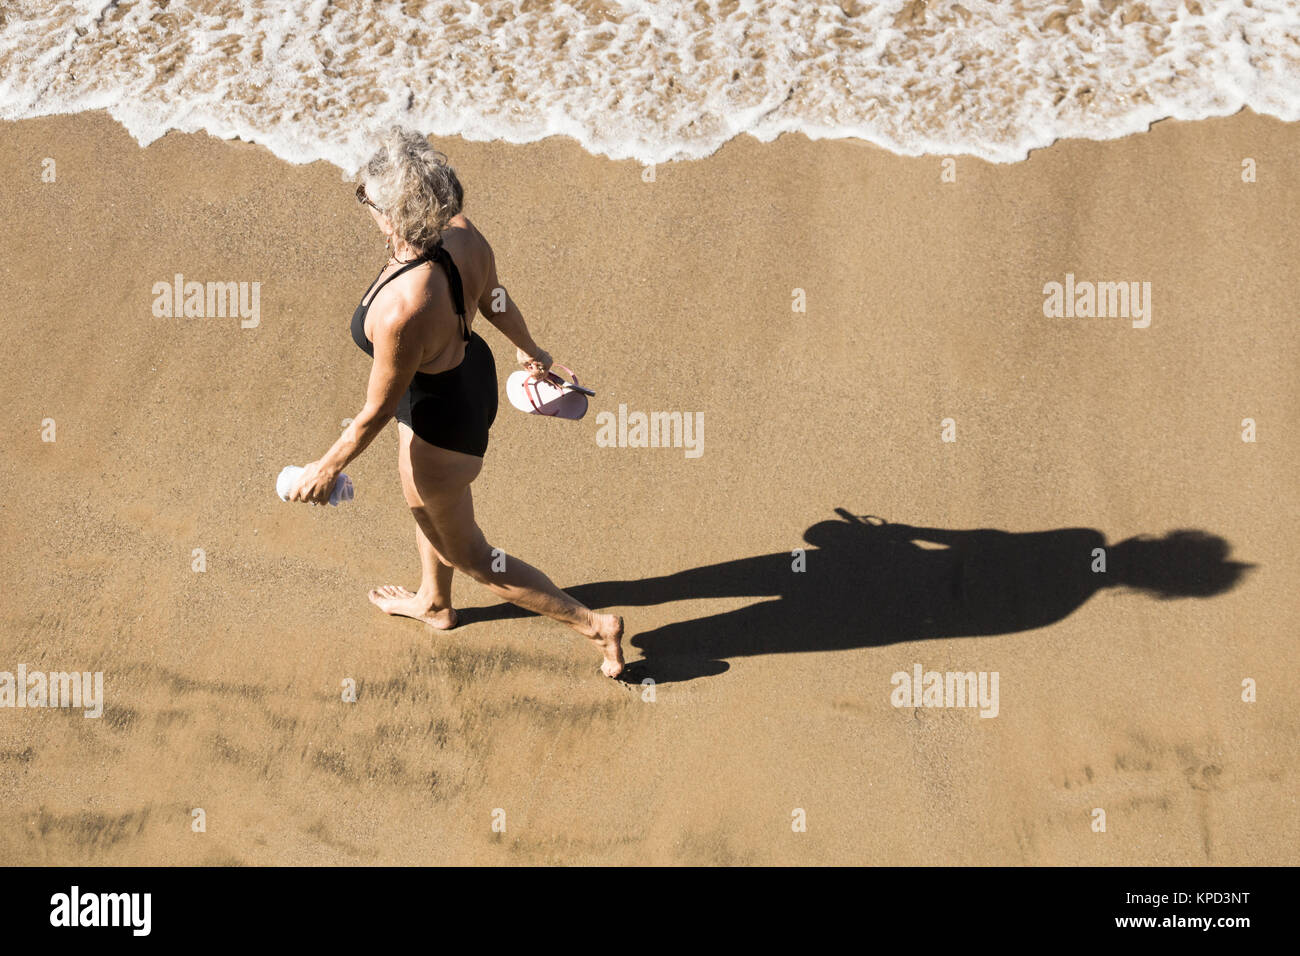 Mature woman in swimming costume walking on beach in Spain Stock Photo